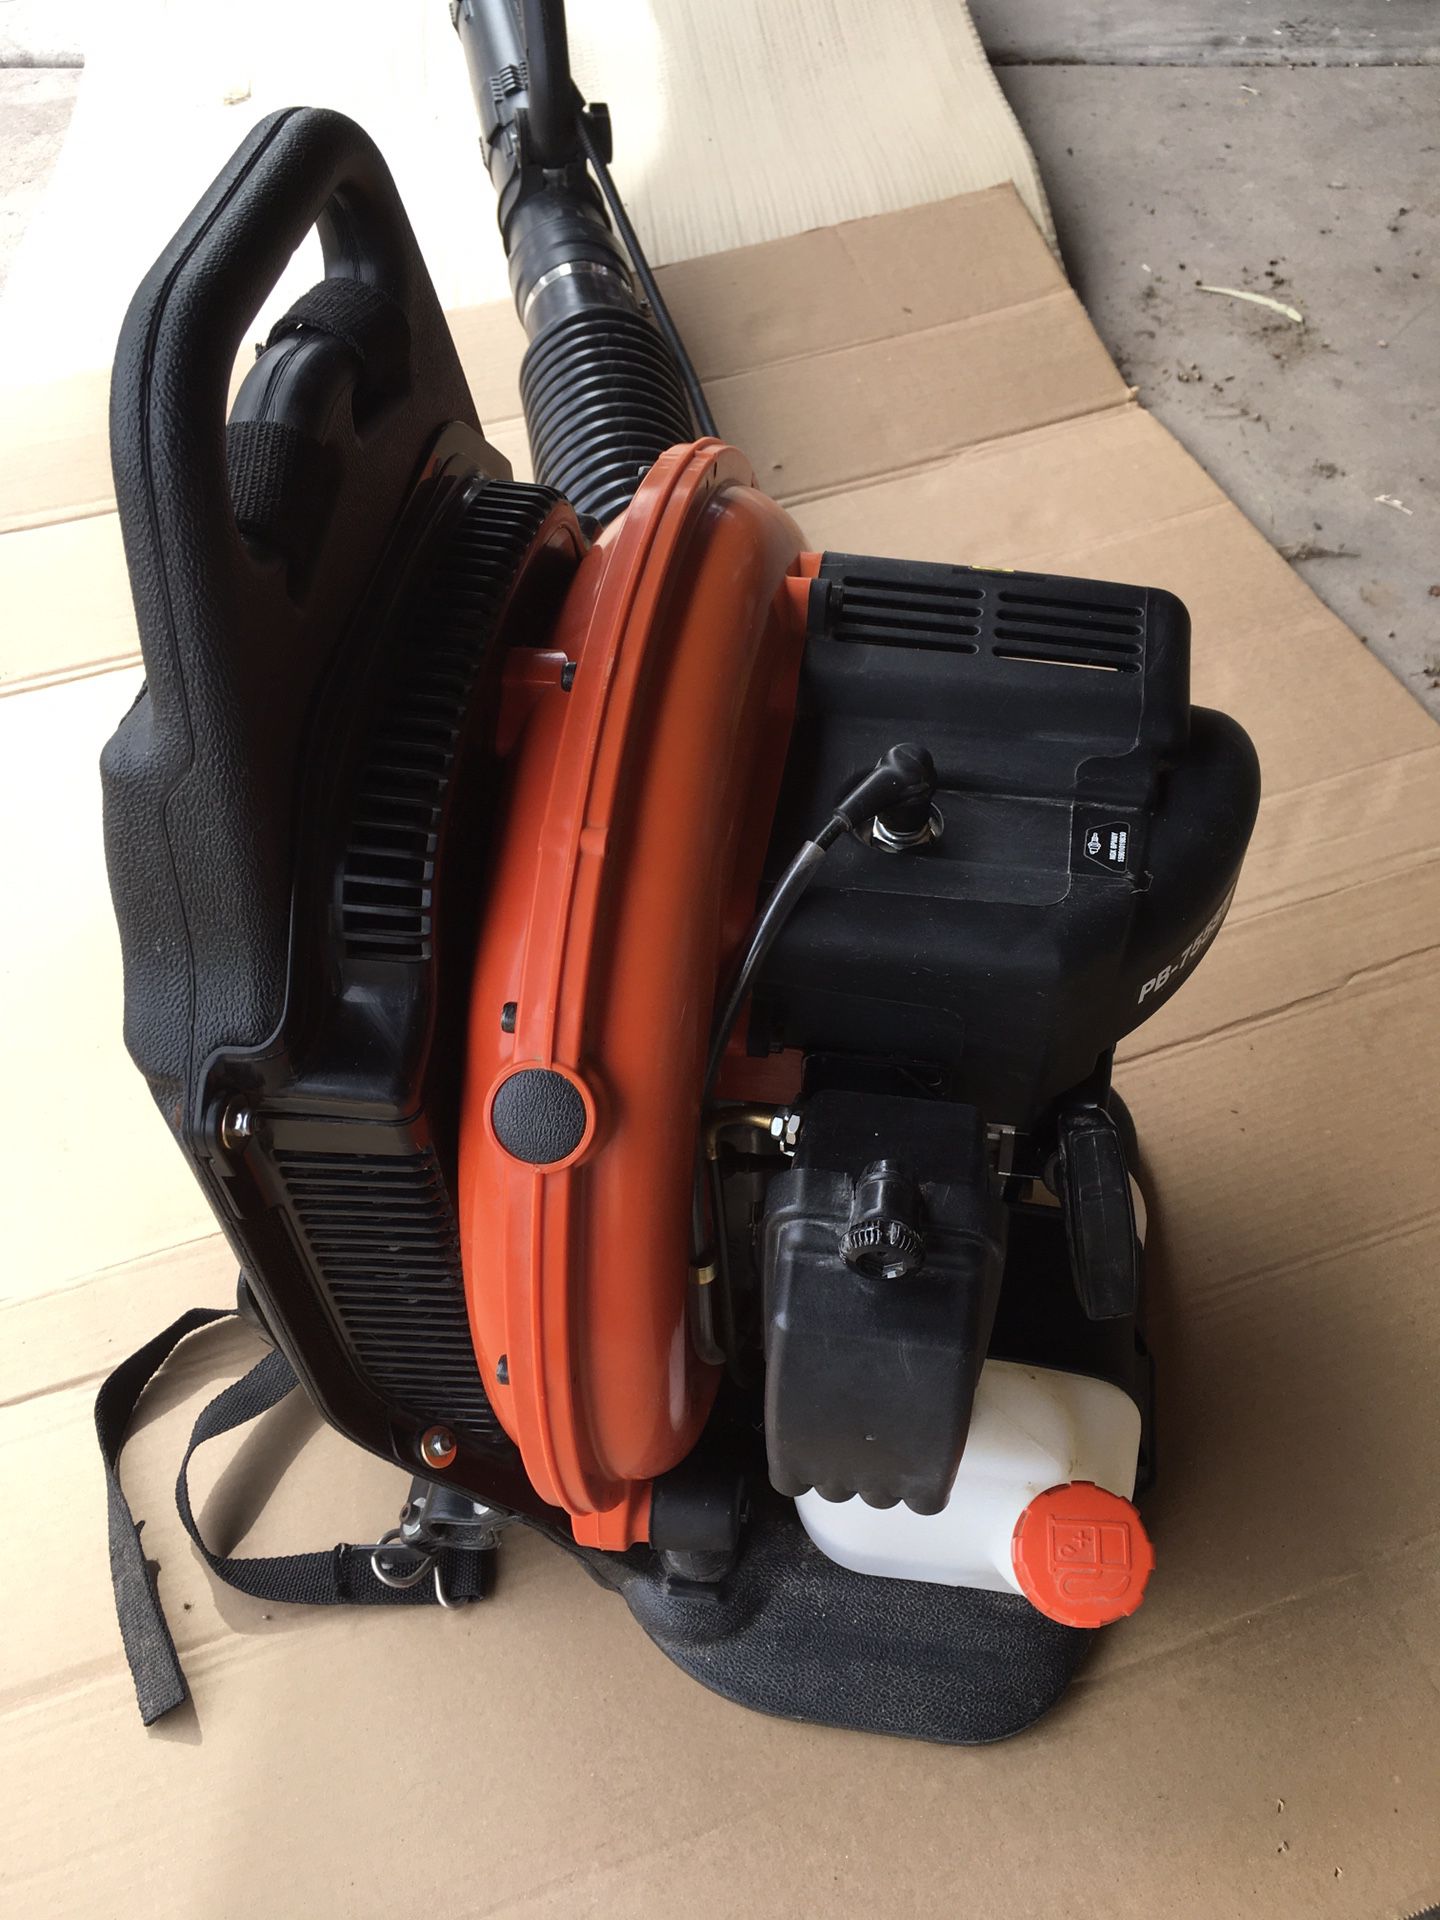  ECHO PB-755ST 233 MPH 651 CFM 63.3cc Gas 2-Stroke Cycle Backpack Leaf Blower with Tube Throttle